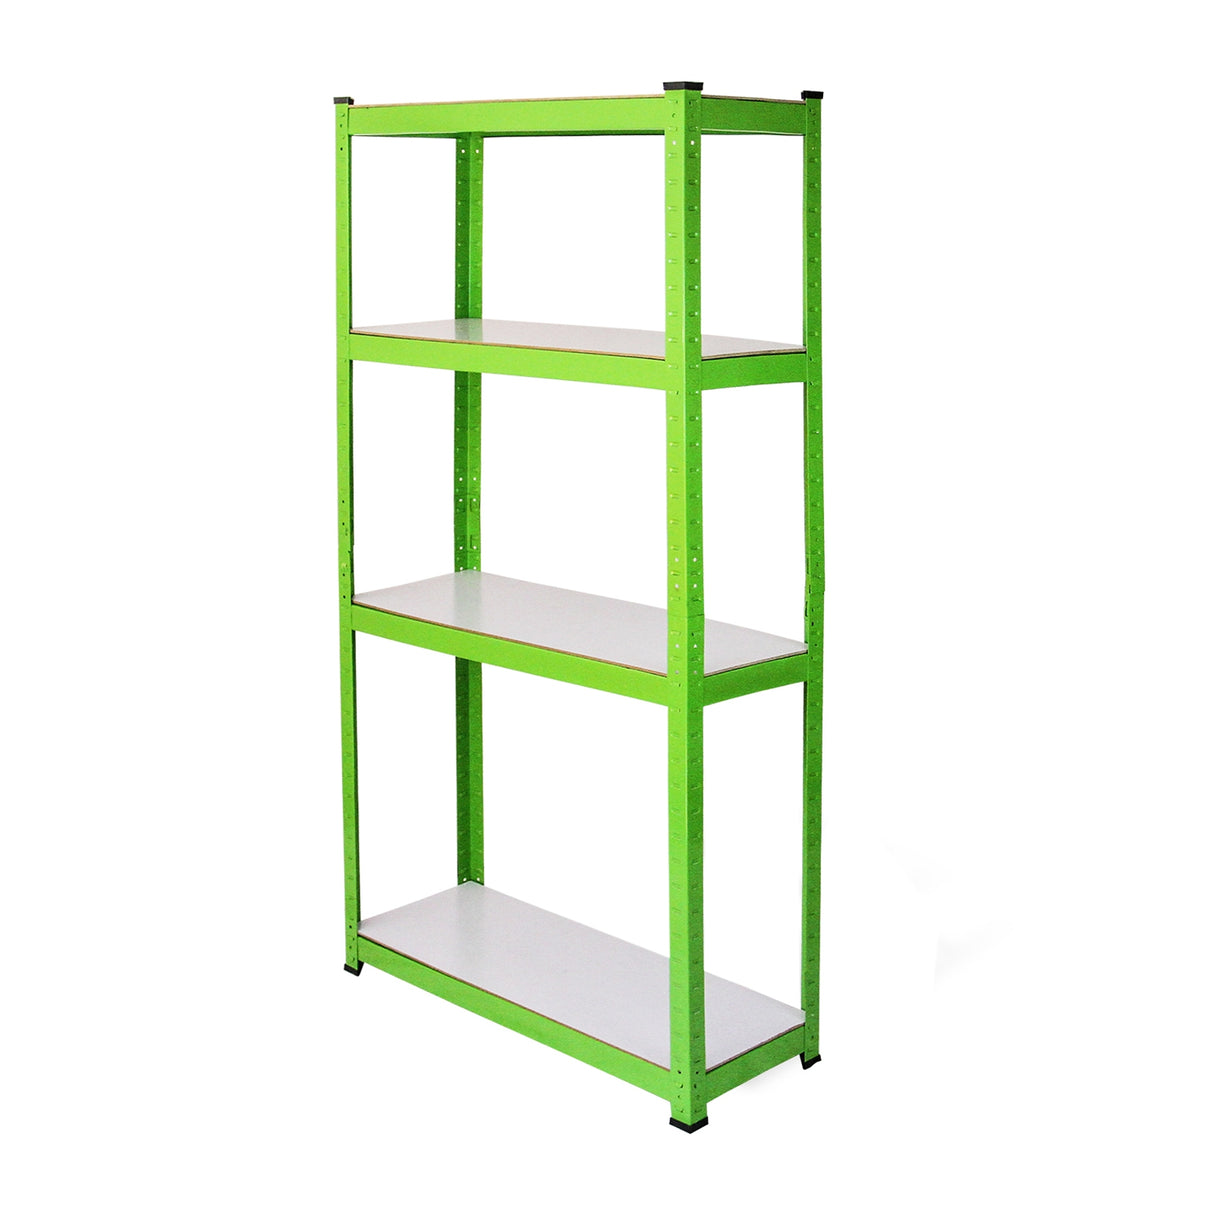 Greenhouse 6ft x 10ft (Green) With Base & Racking